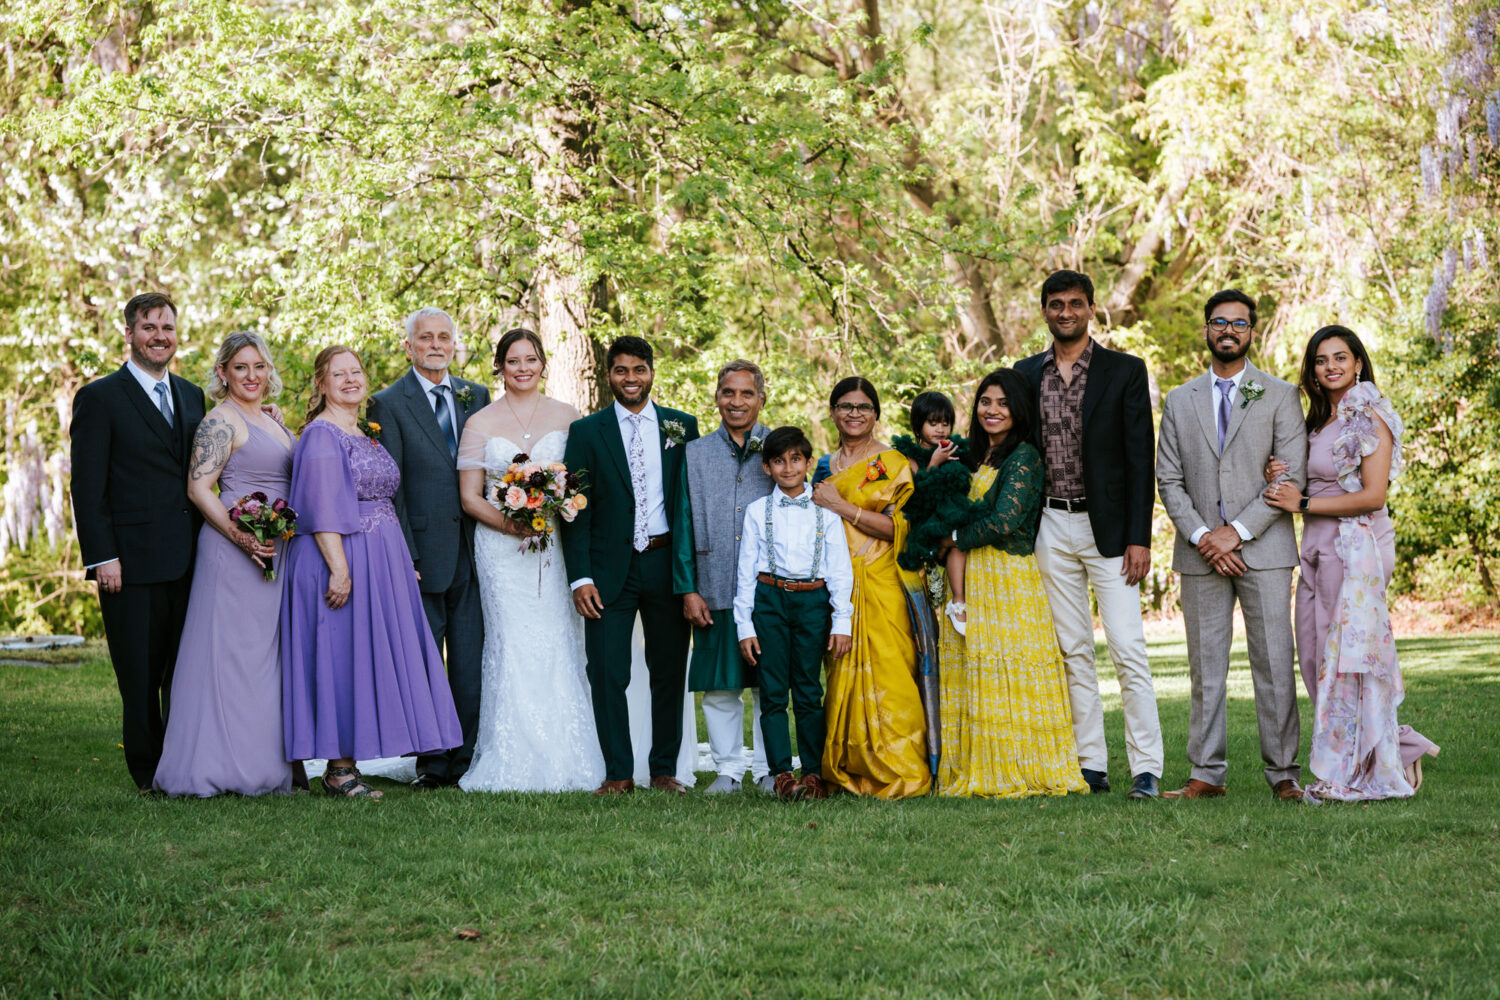 family photo during wedding day at rust manor house in leesburg virginia